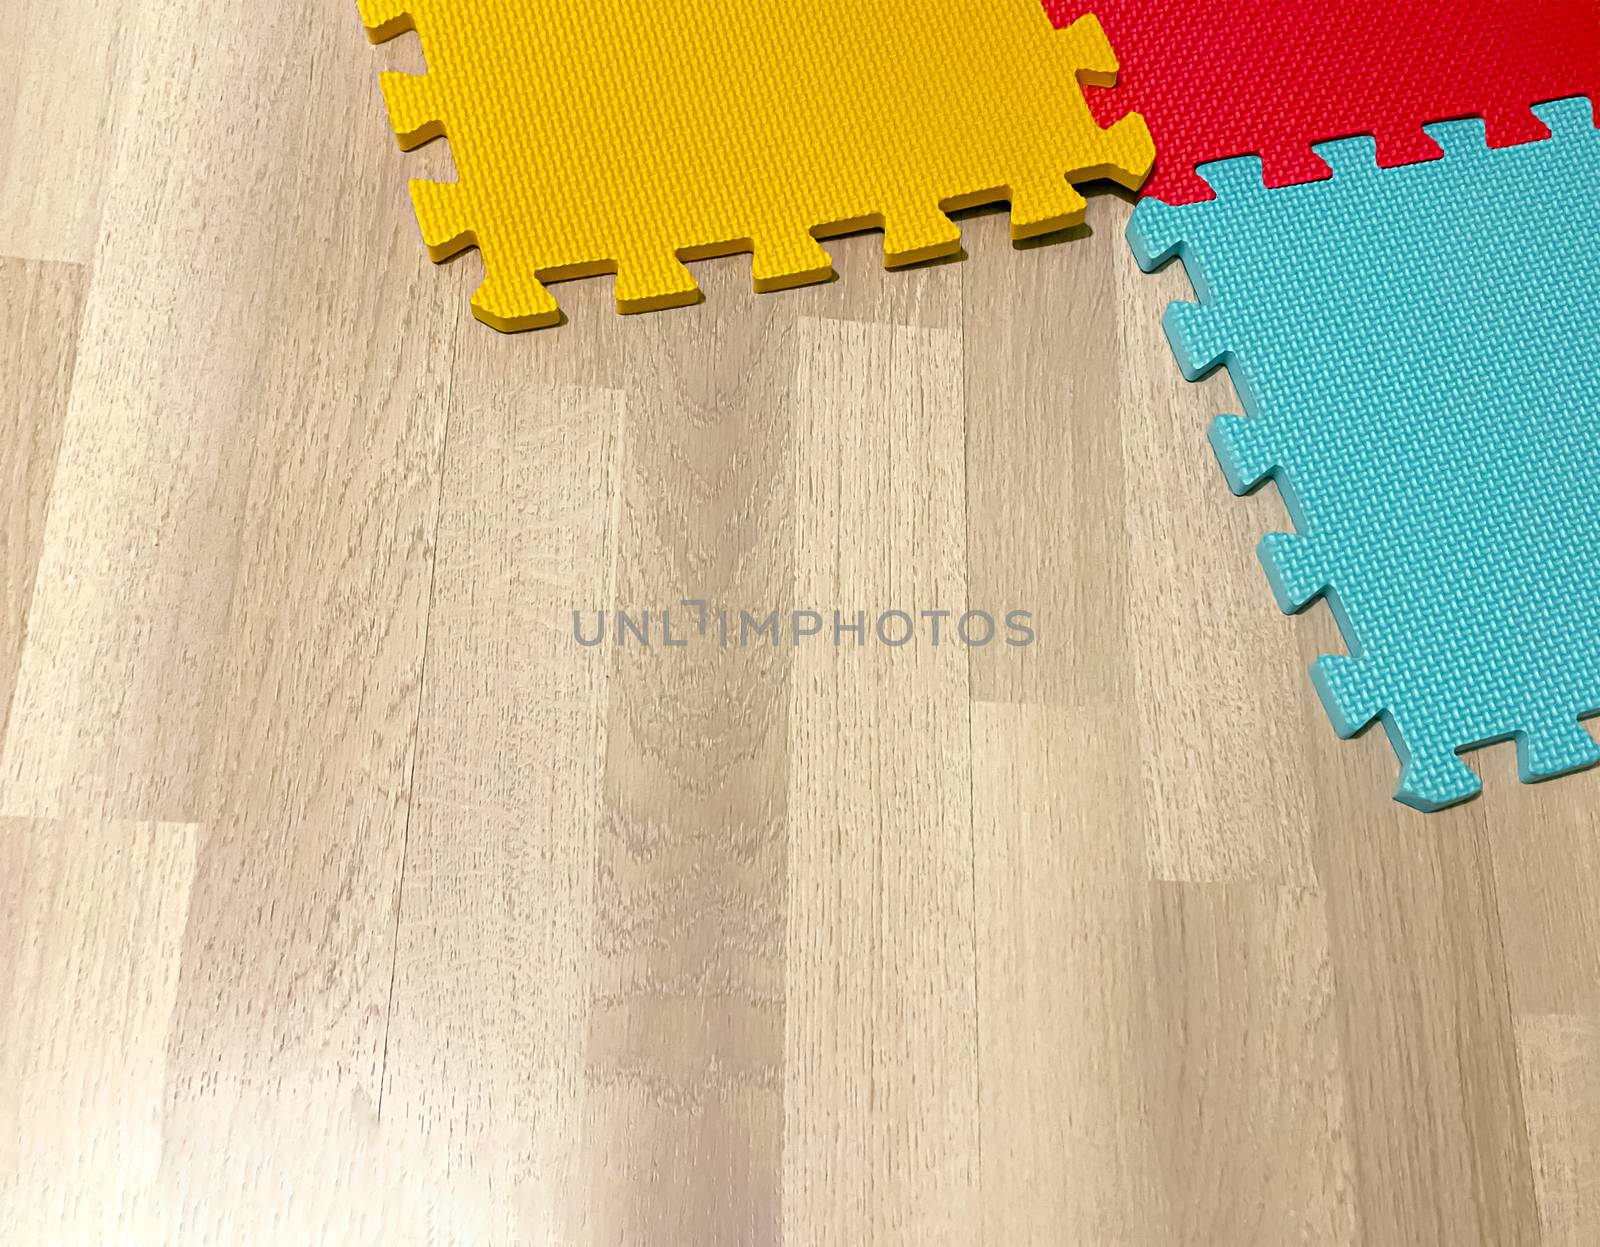 Soft rubber mat composed of colored blocks intersected with each other on a wooden floor. Suitable for children to play or for yoga exercises. Interior shot